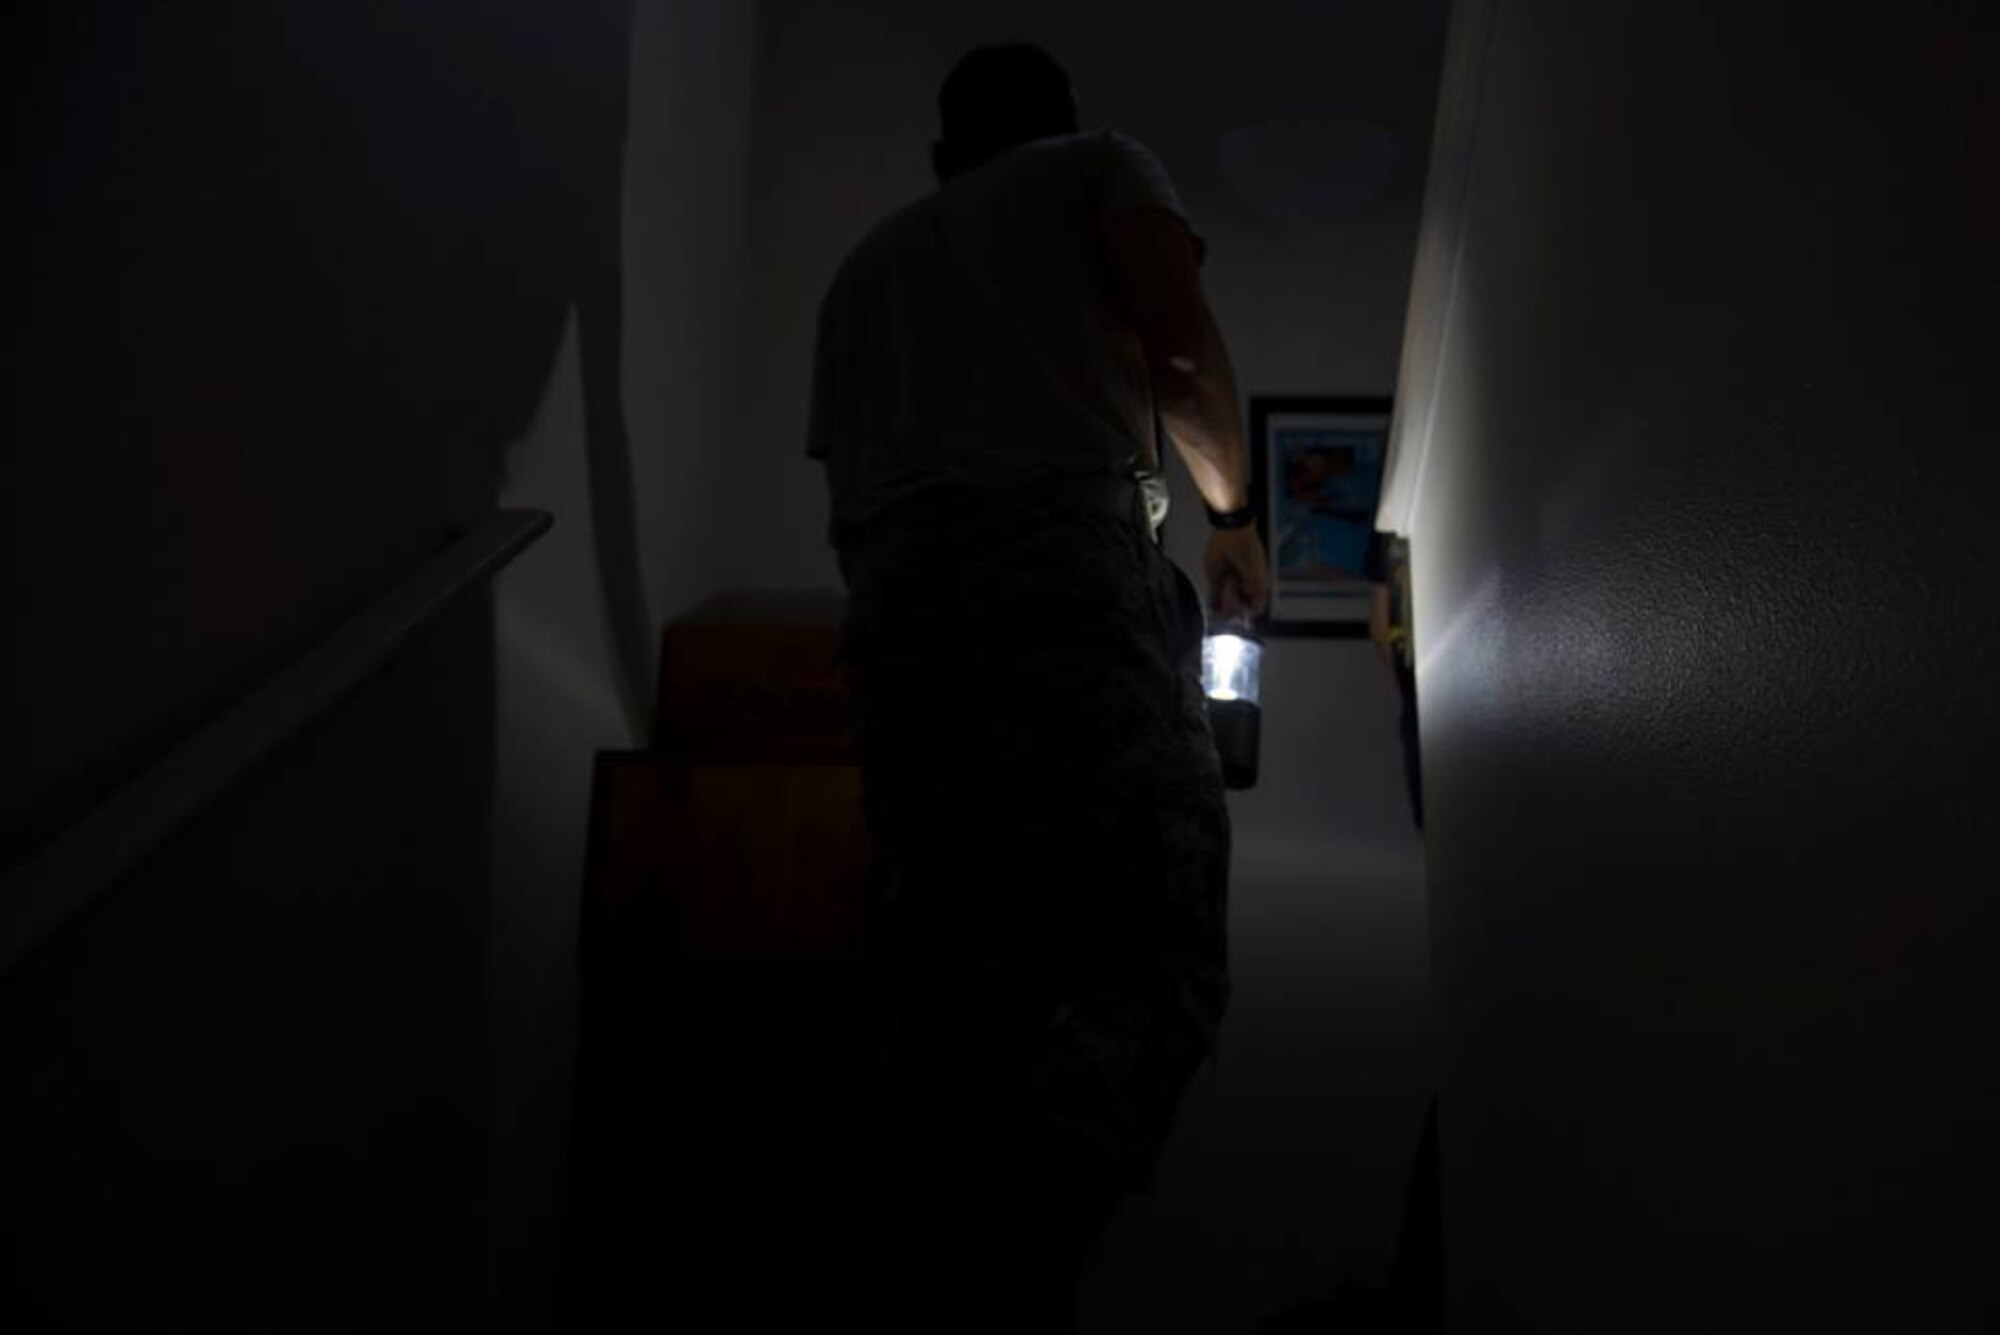 1st Lt. Adam Kriete, 337th Air Control Squadron student, searches for personal items in his home, at Tyndall Air Force Base, Fla., Oct. 19, 2018. Tyndall AFB was damaged by Hurricane Michael which displaced approximately 11,000 people, to include the Kriete family who travelled back to Tyndall during a five hour window to recover their belongings.